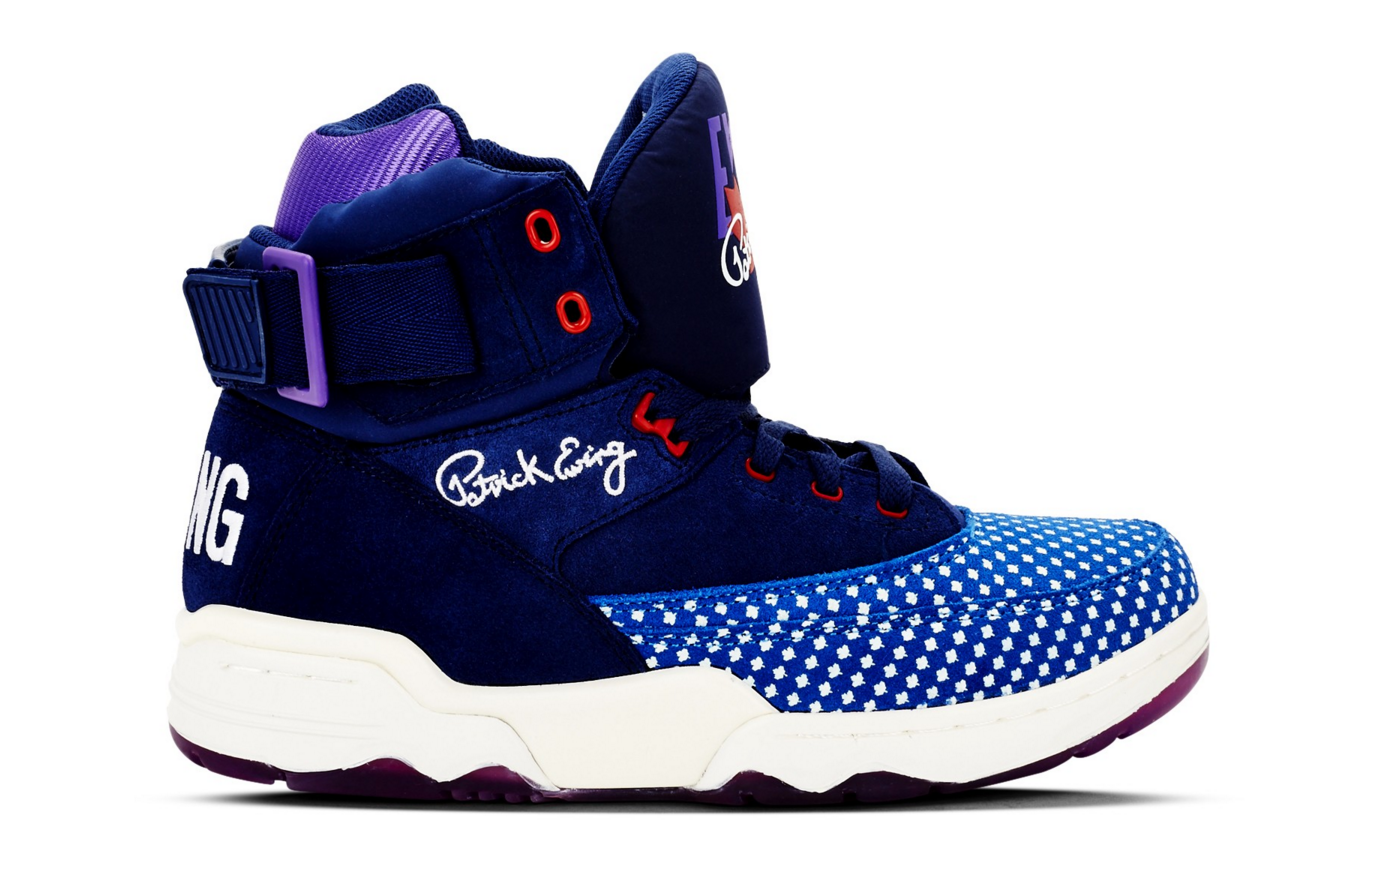 Ewing 33 Hi &quot;All Star&quot; on Sale